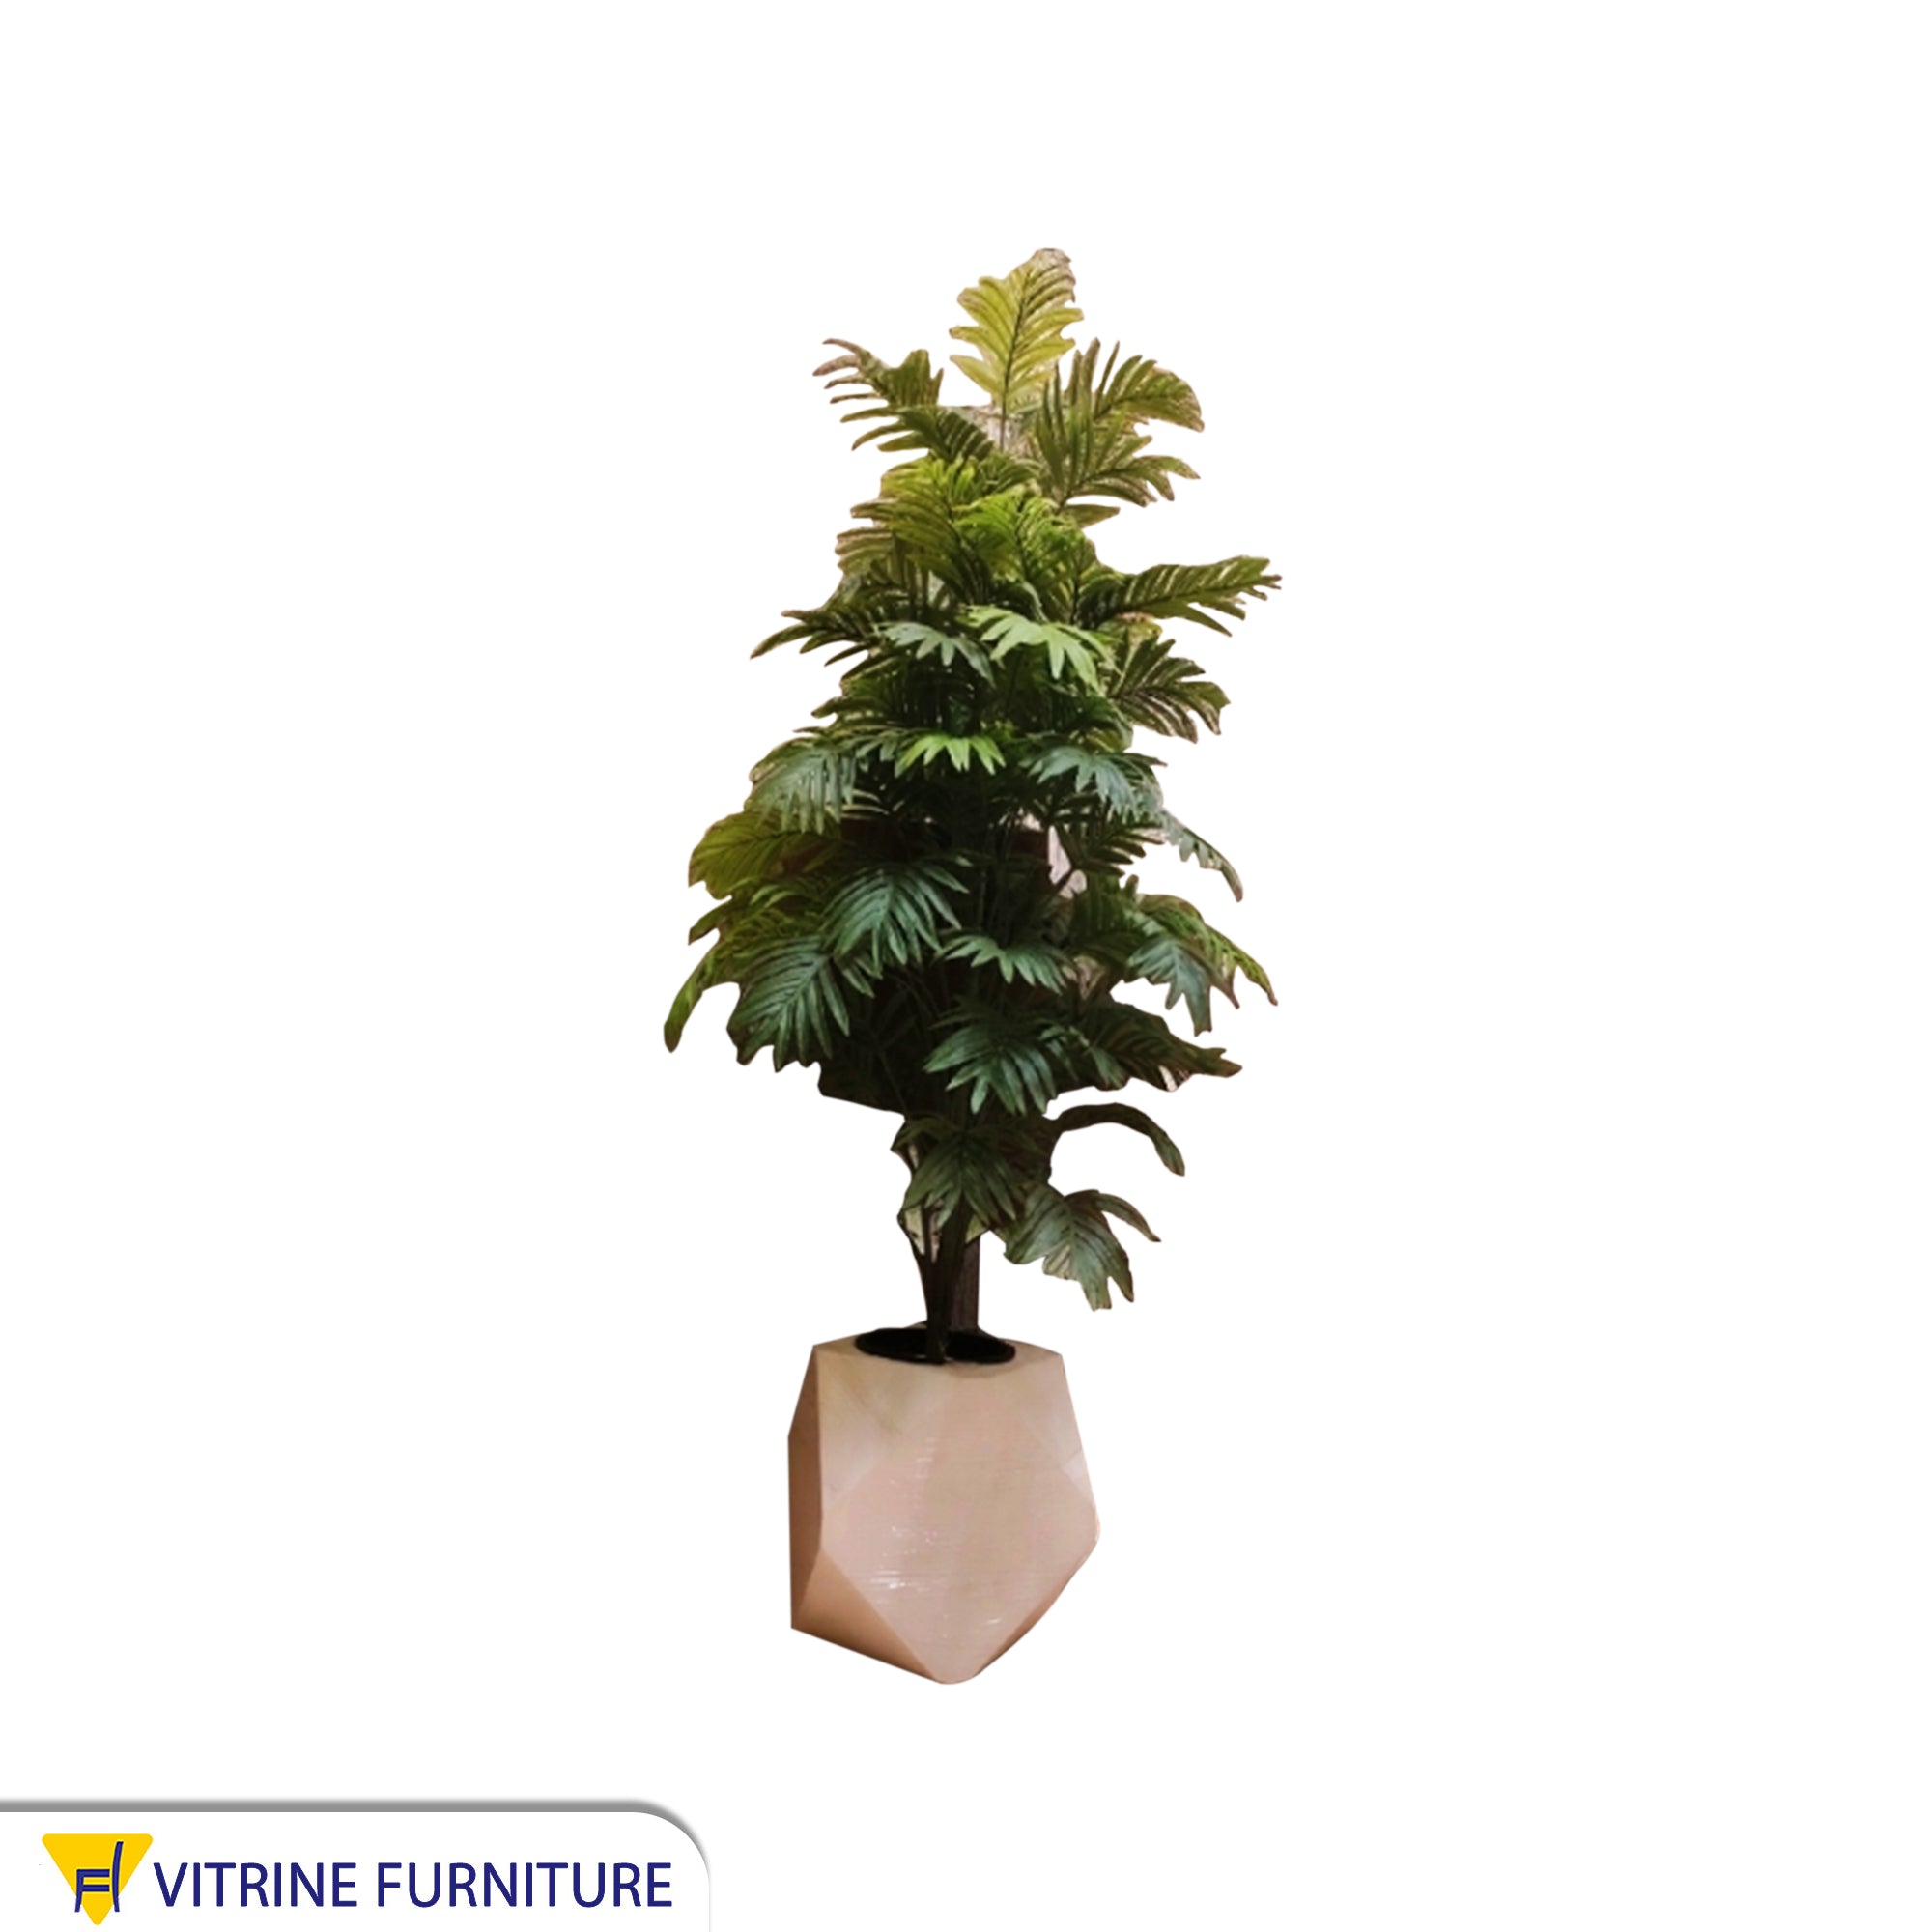 Artificial plantings for corners of your home